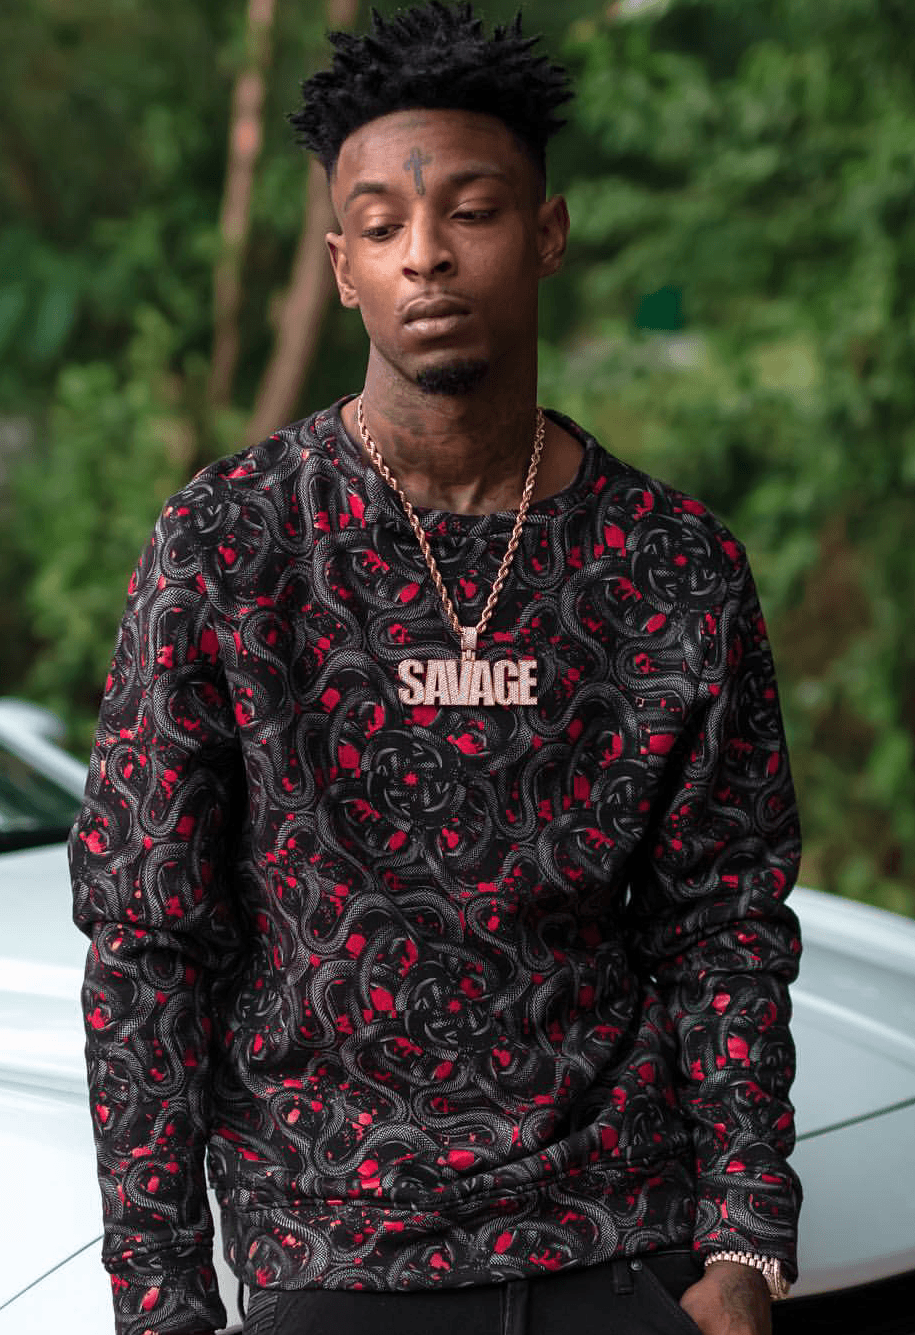 21 Savage In Ash Background Wearing Black Head Covered TShirt And Silver  Chains On Neck HD 21 Savage Wallpapers  HD Wallpapers  ID 44378